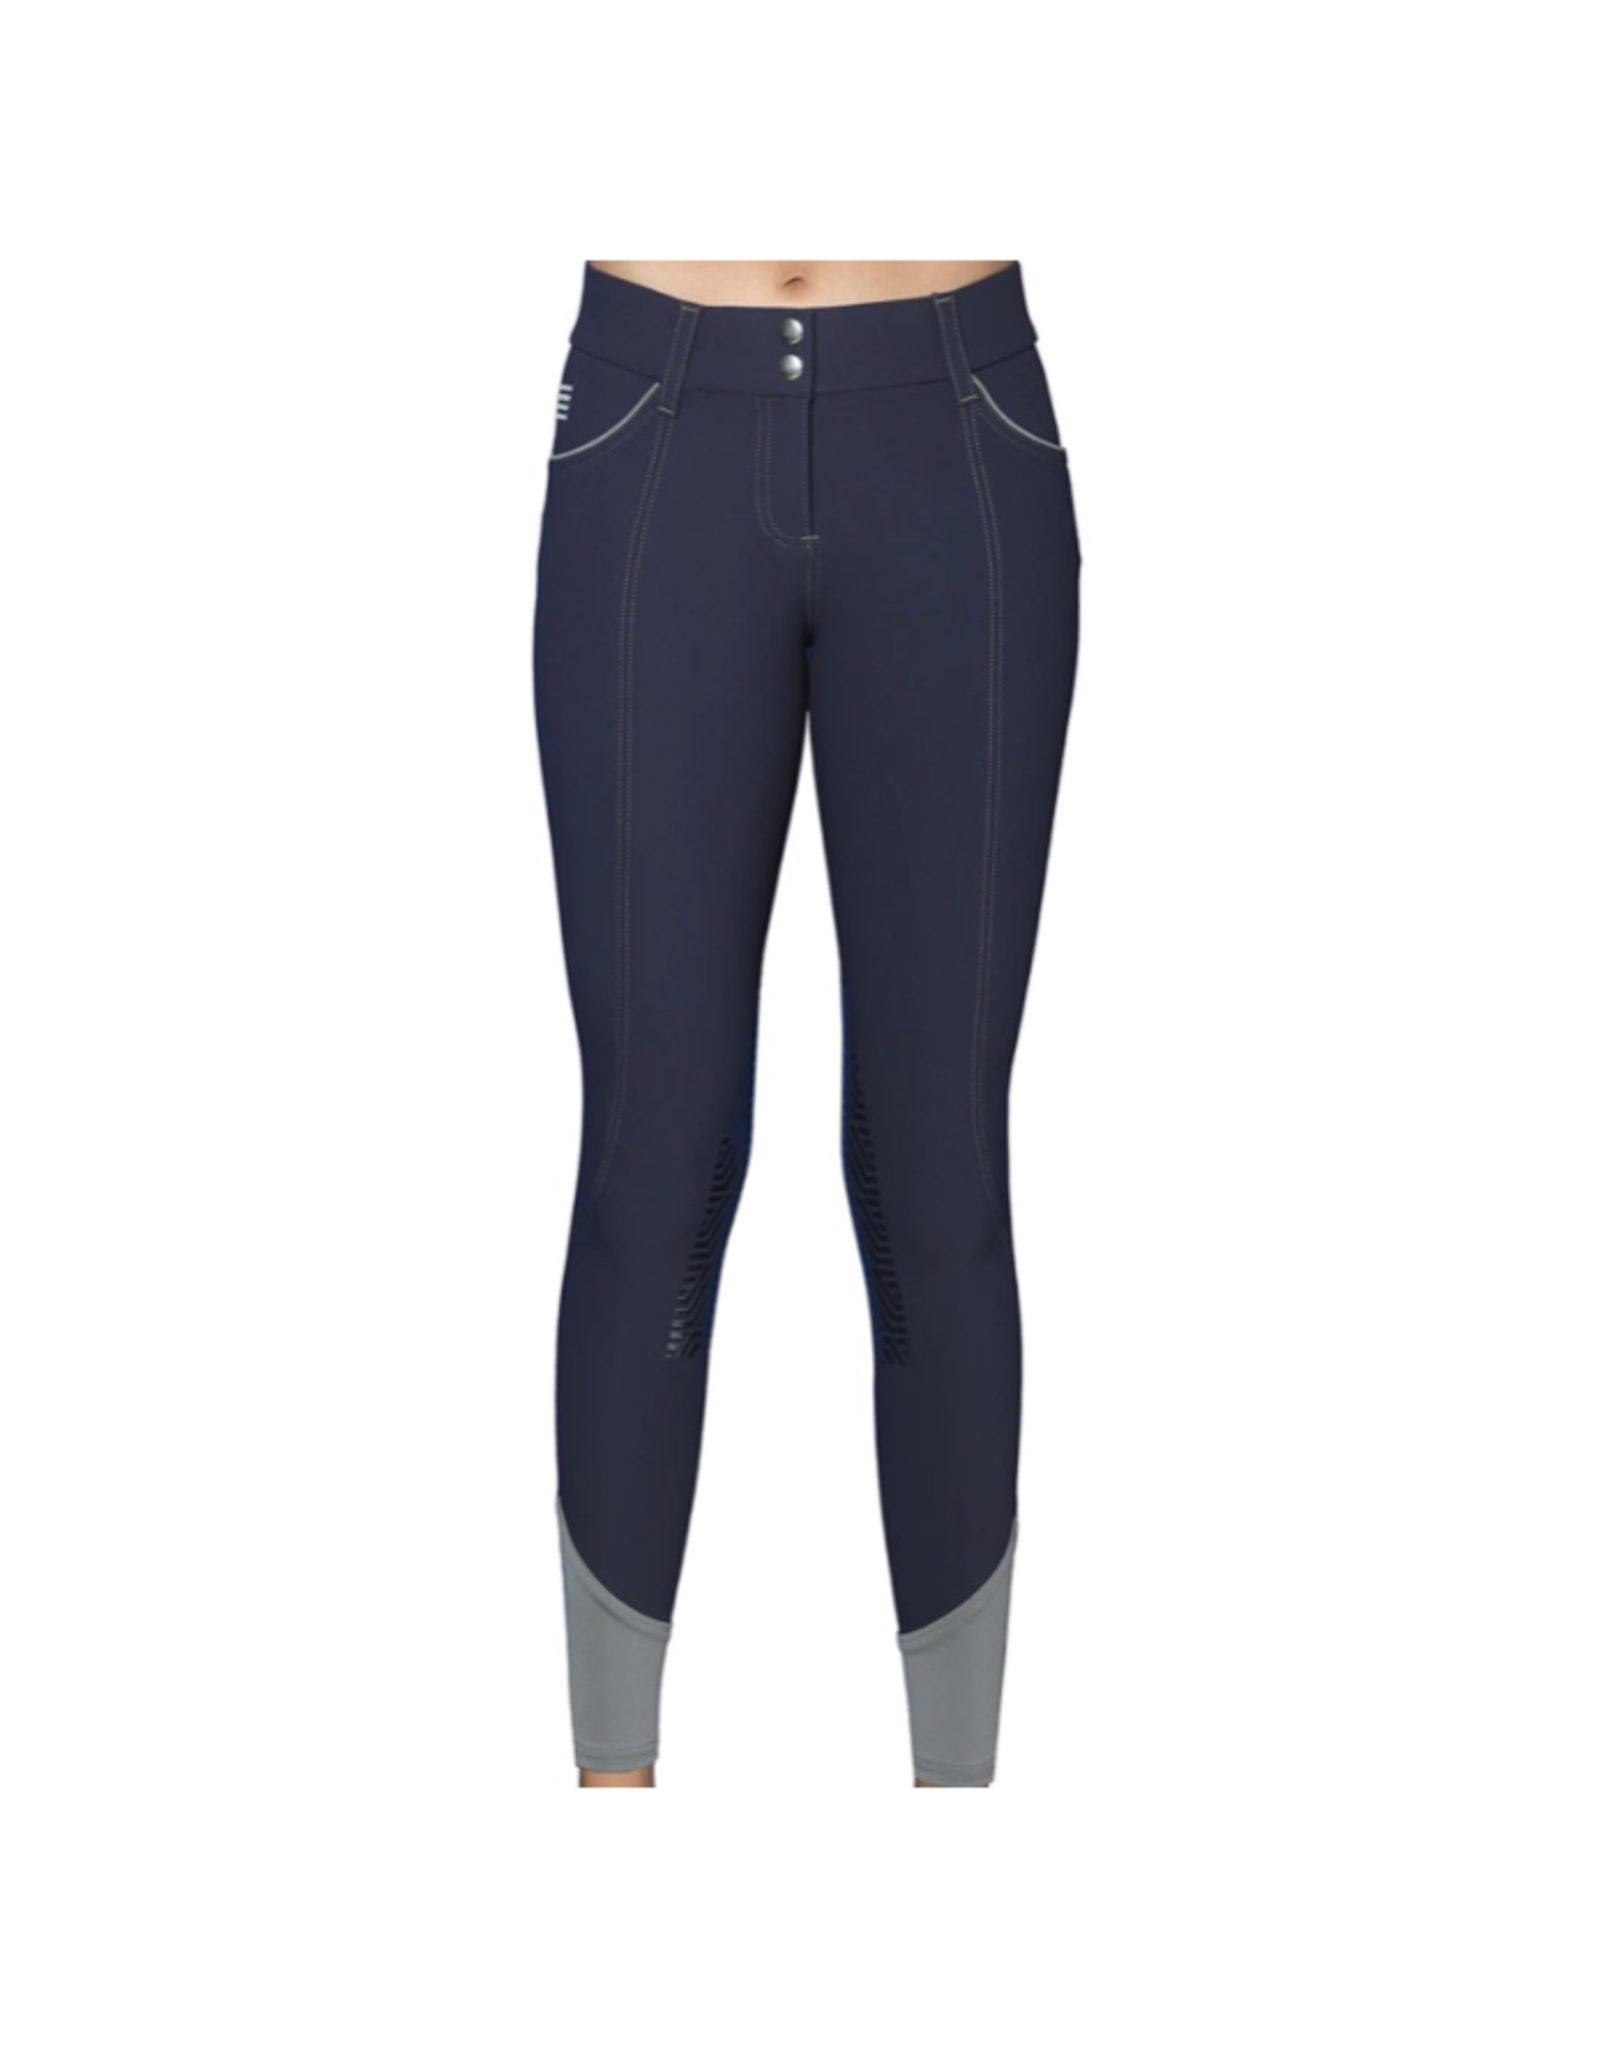 GhoDho GhoDho Ladies' Lily Pro Breech